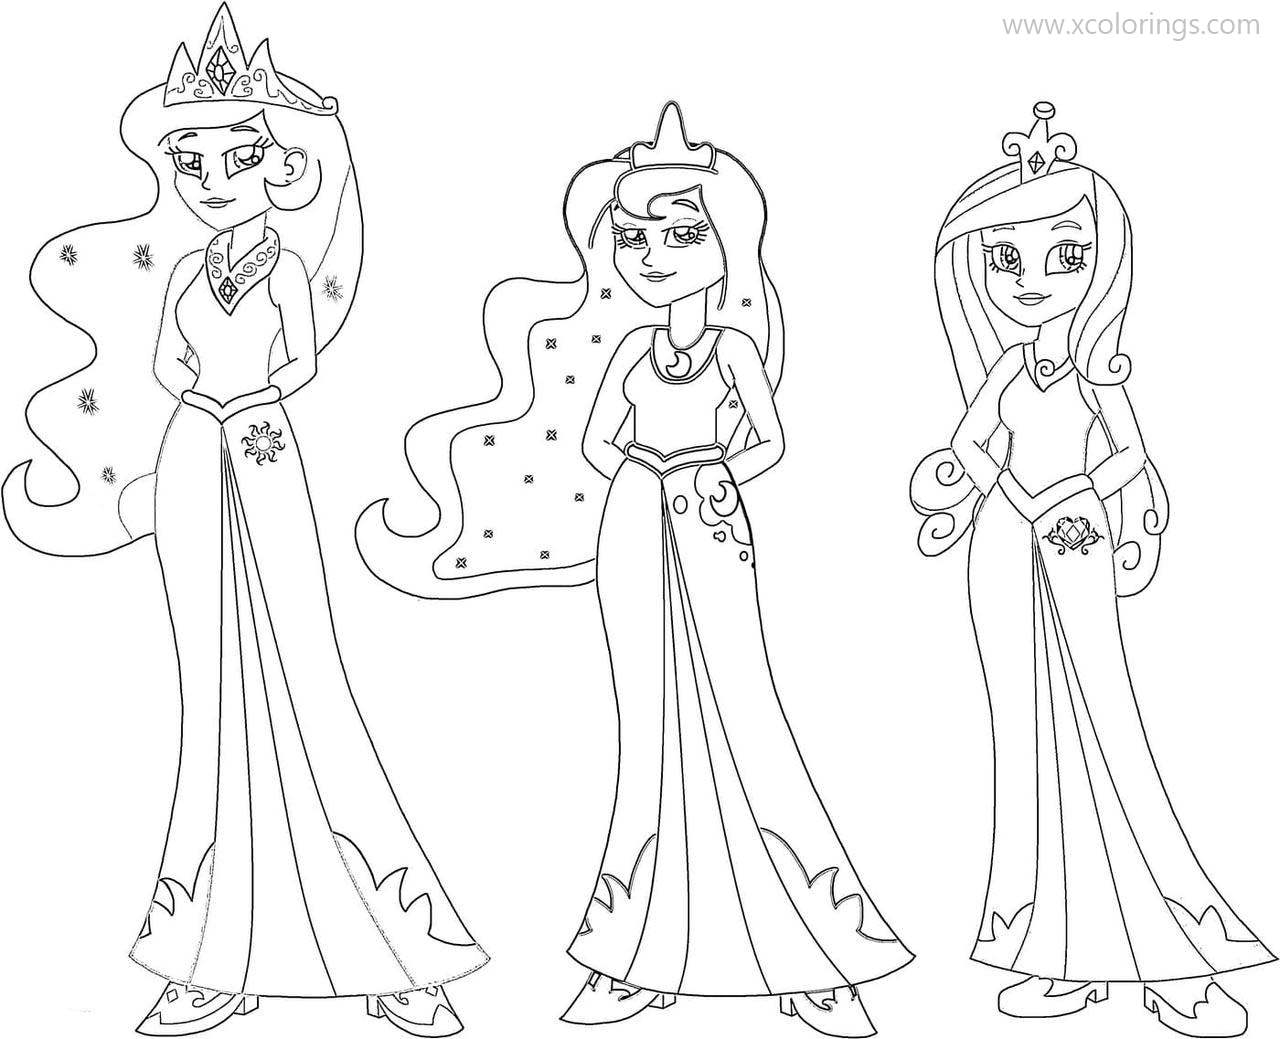 Free Equestria Girls Coloring Pages Celestia Twilight and Cadence printable